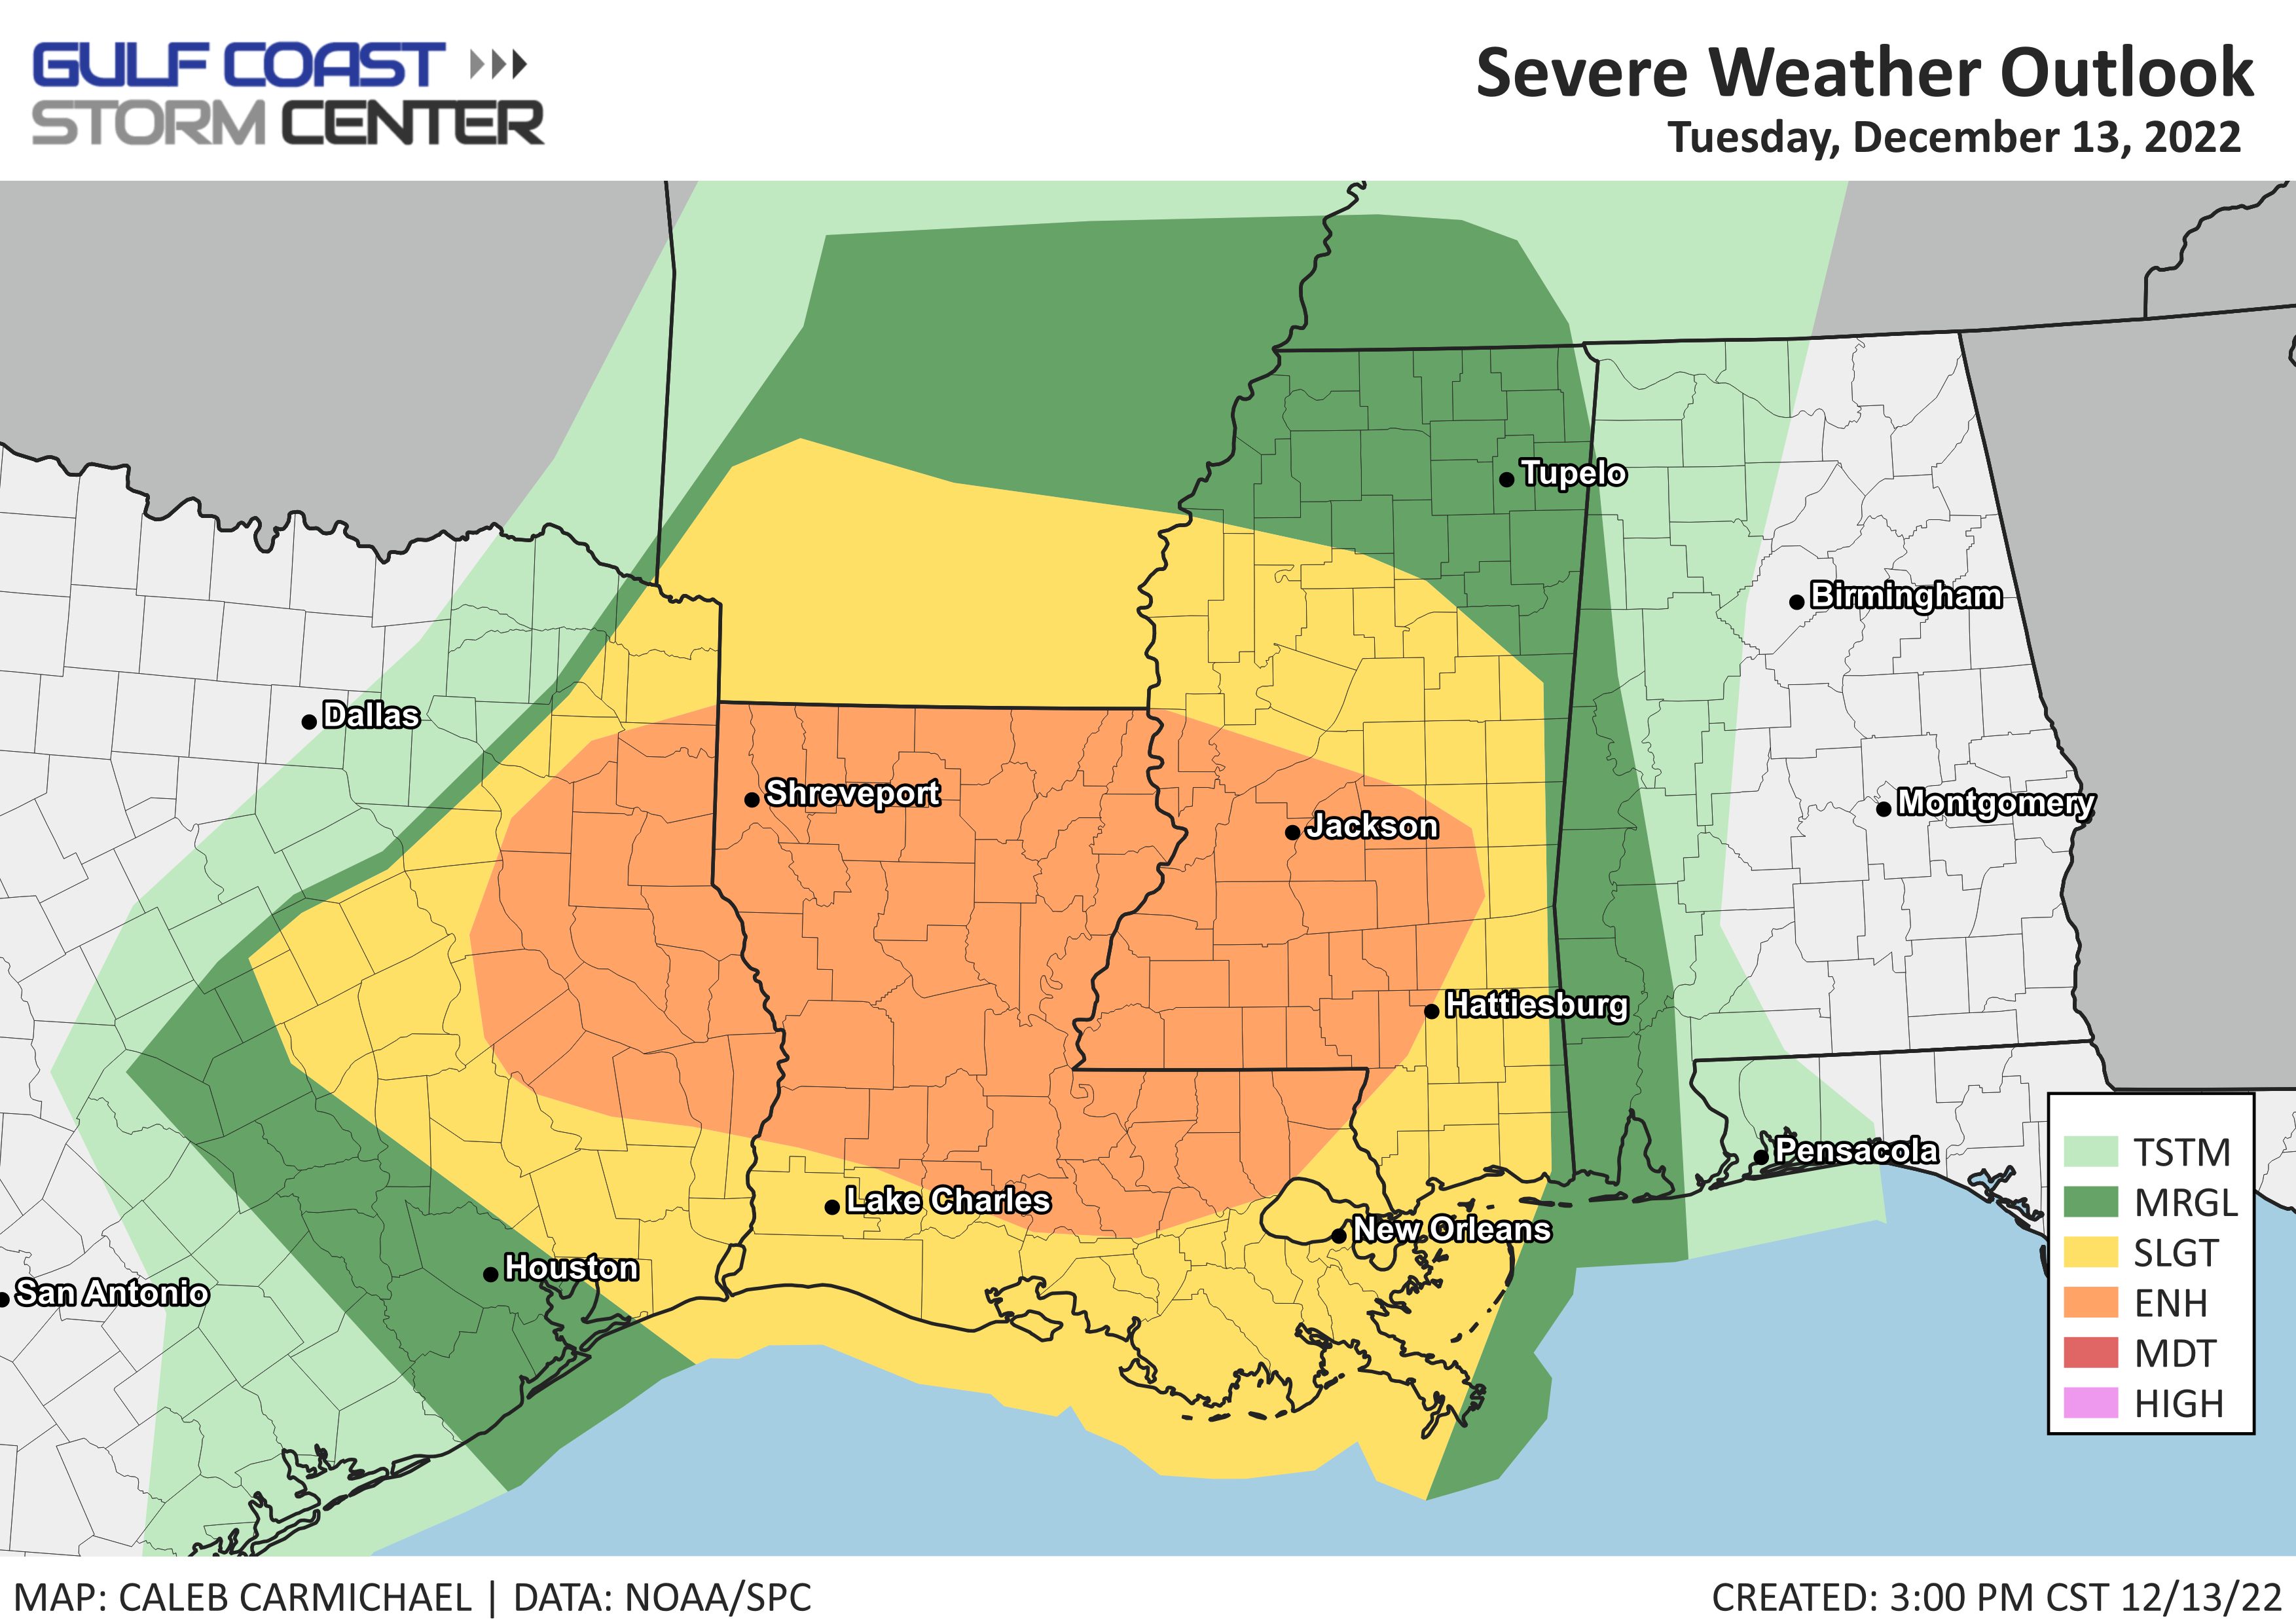 Severe Weather Threat Ongoing Across Parts of Texas, Louisiana; Risk